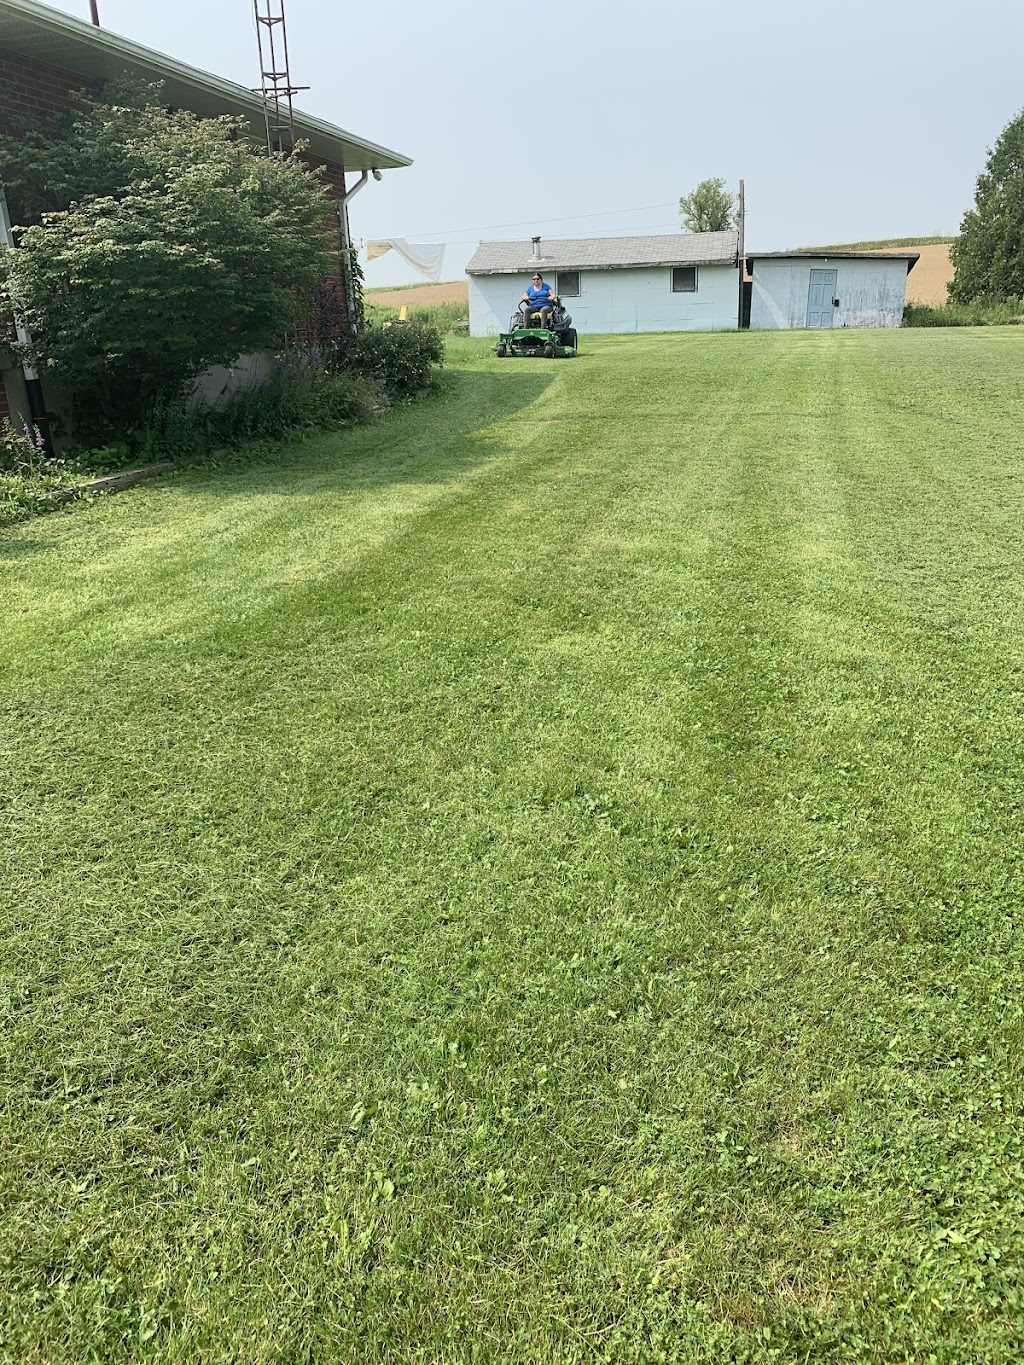 Little’s Lawn Care | 132 Stephen Dr, Bolton, ON L7E 4Y1, Canada | Phone: (416) 951-8209